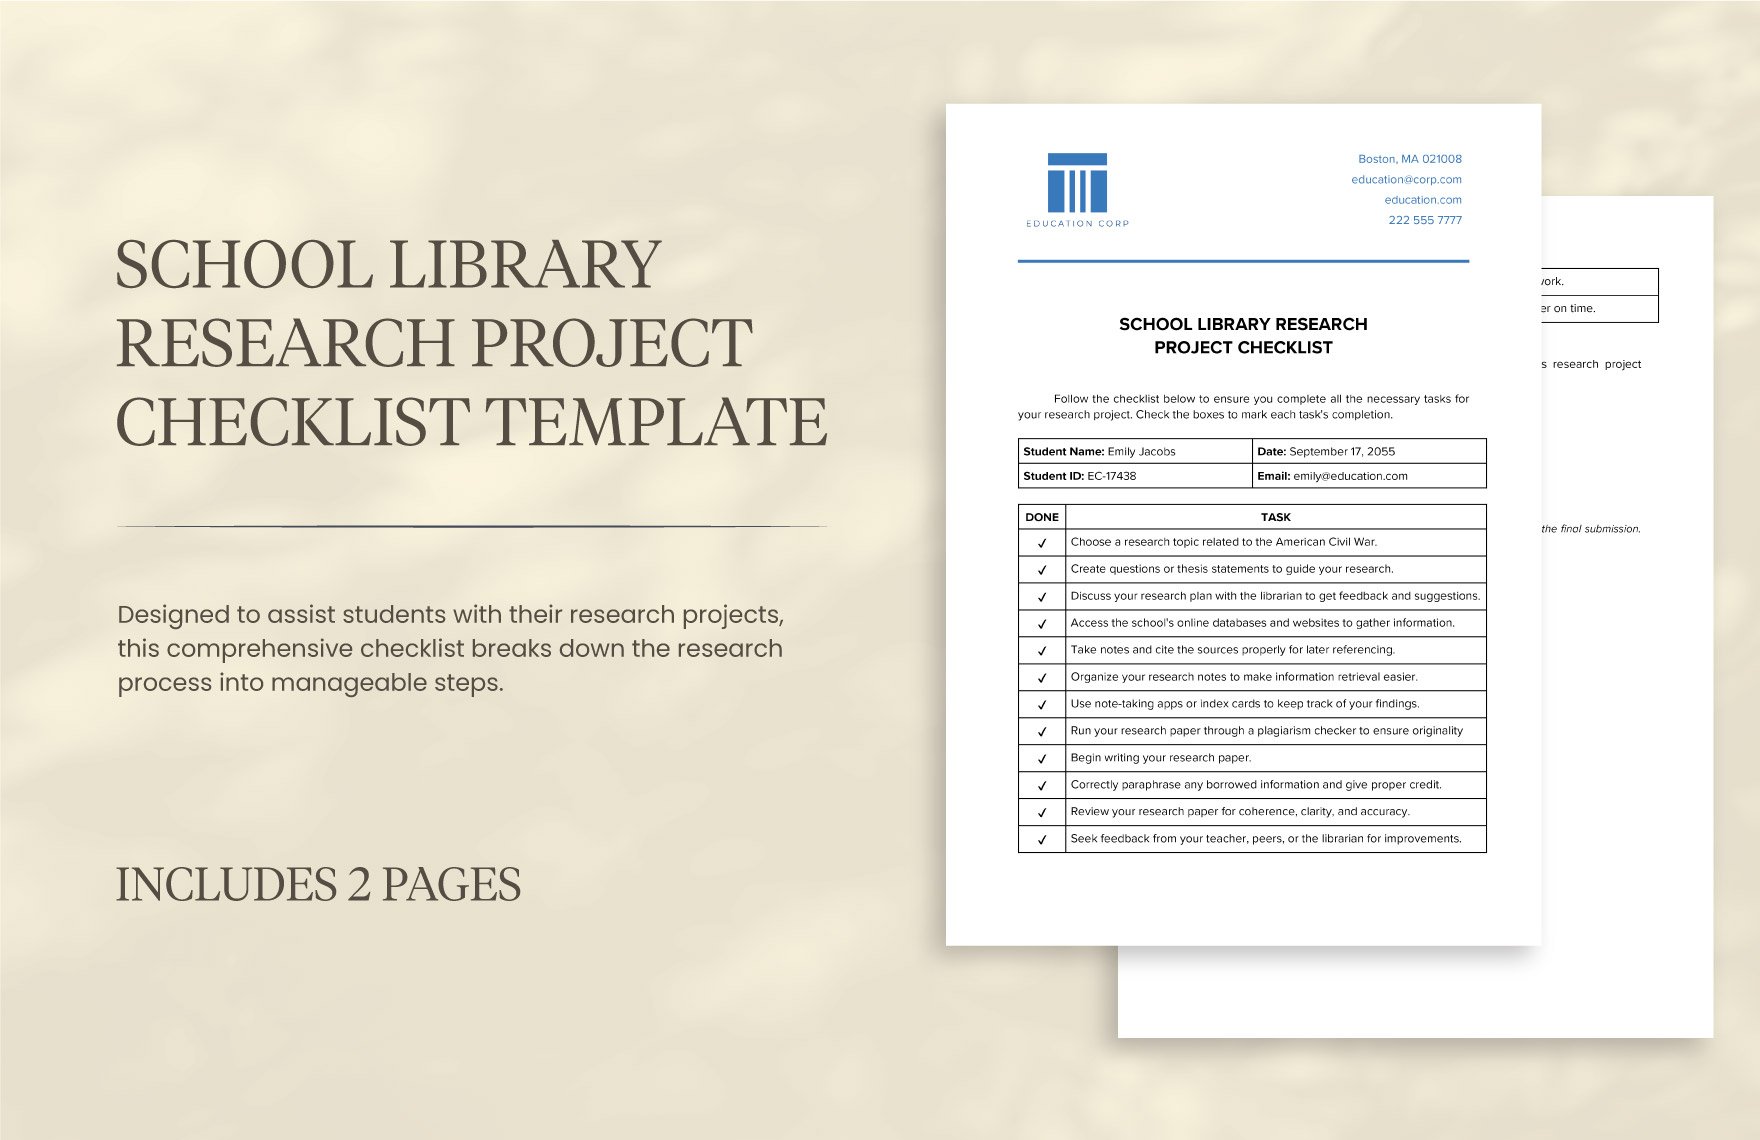 School Library Research Project Checklist Template